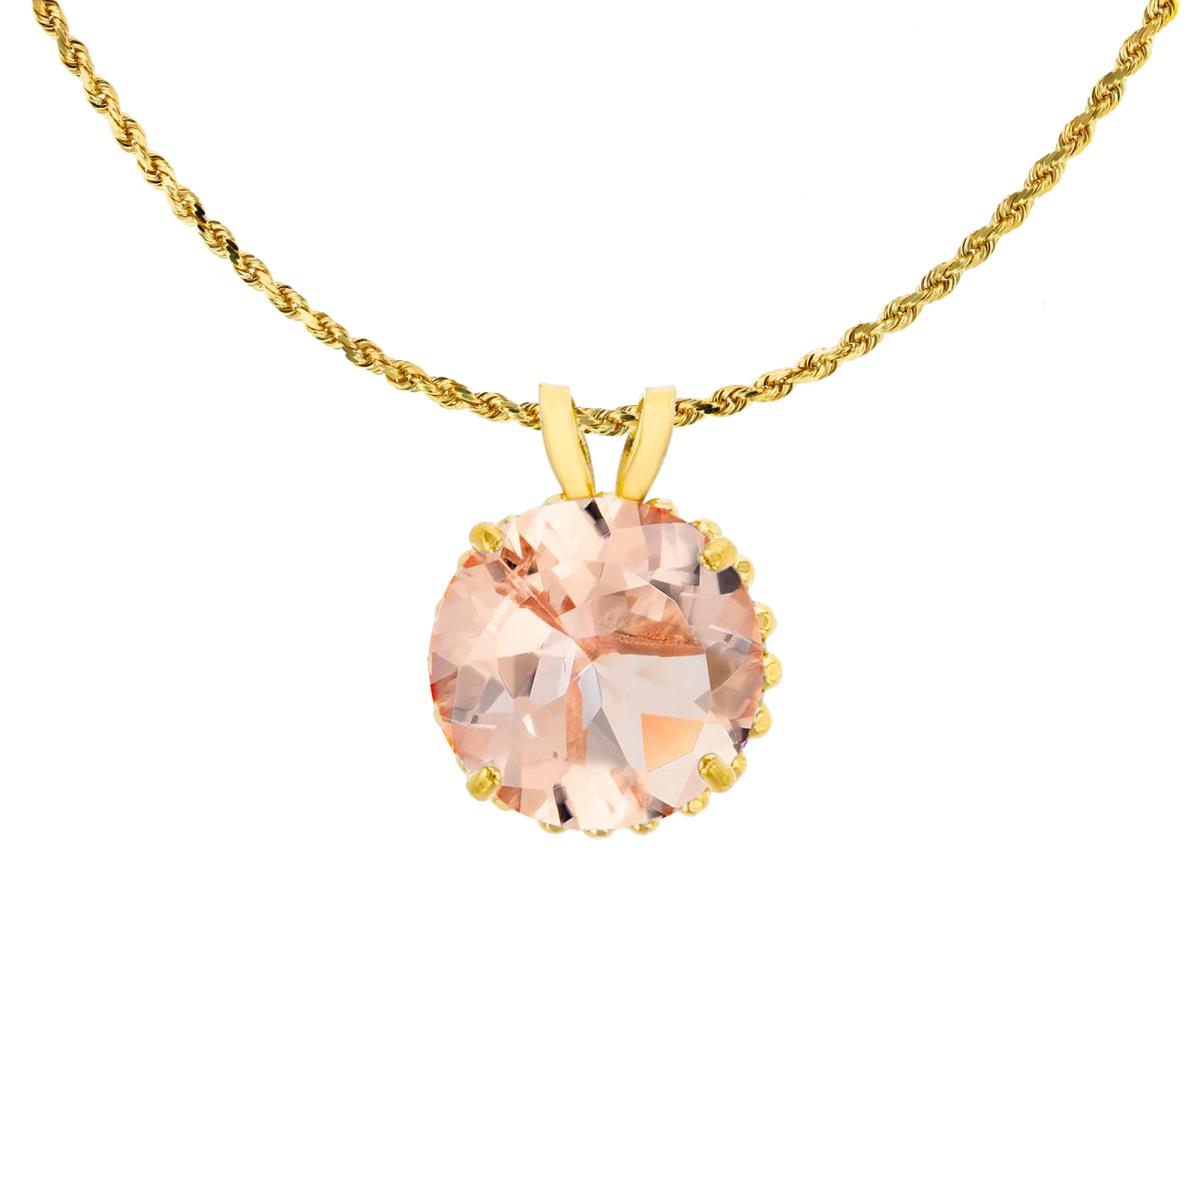 10K Yellow Gold 7mm Rd Cut Morganite with Bead Frame Rabbit Ear 18" Rope Chain Necklace